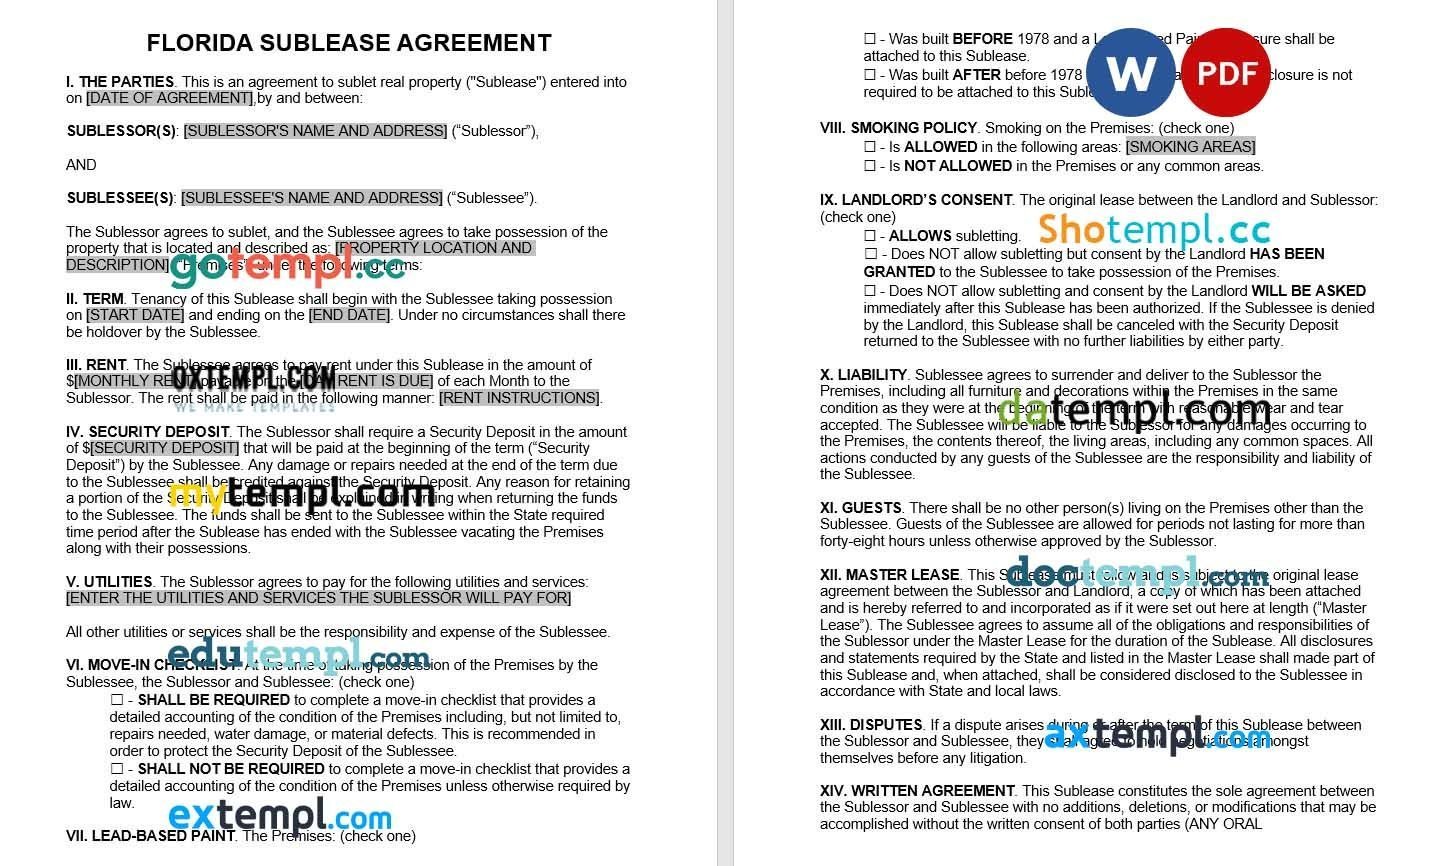 Florida Sublease Agreement example, fully editable